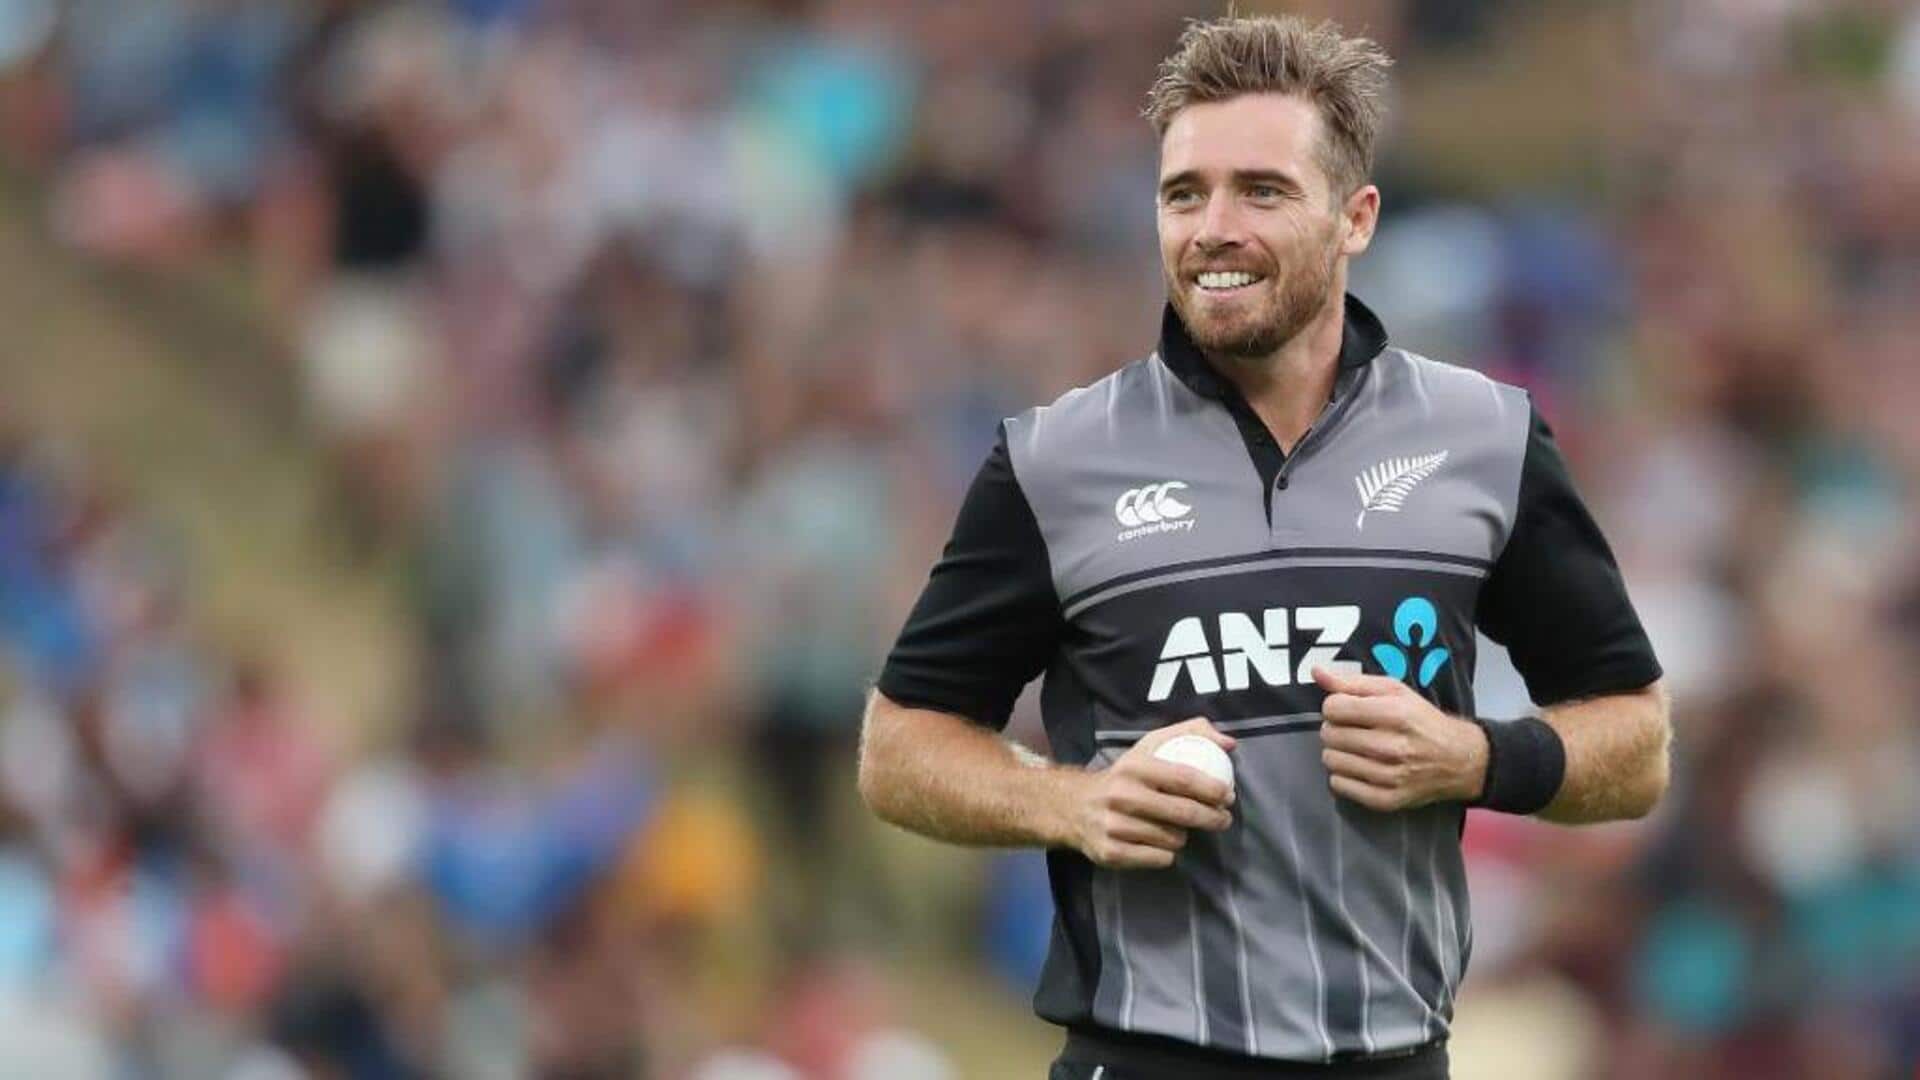 Tim Southee becomes first bowler to complete 150 T20I wickets